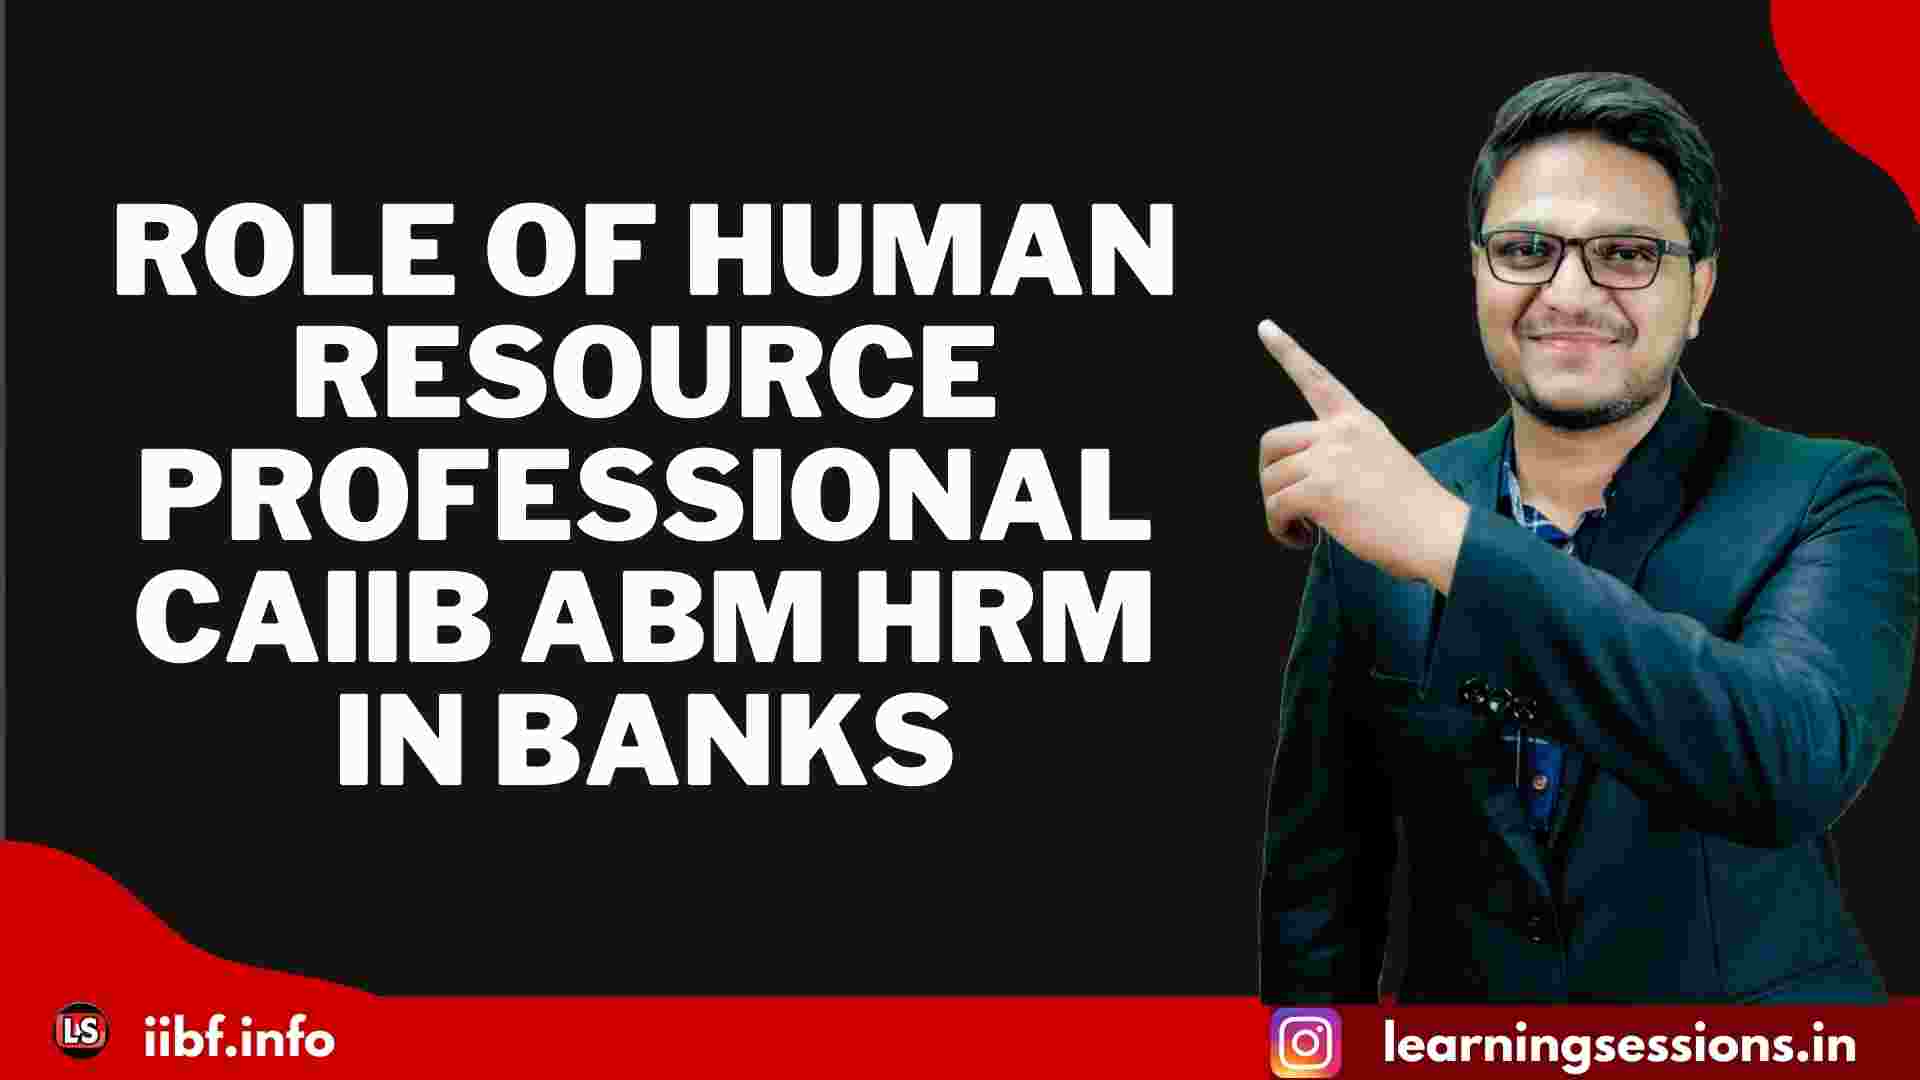 ROLE OF HUMAN RESOURCE PROFESSIONAL CAIIB ABM HRM IN BANKS